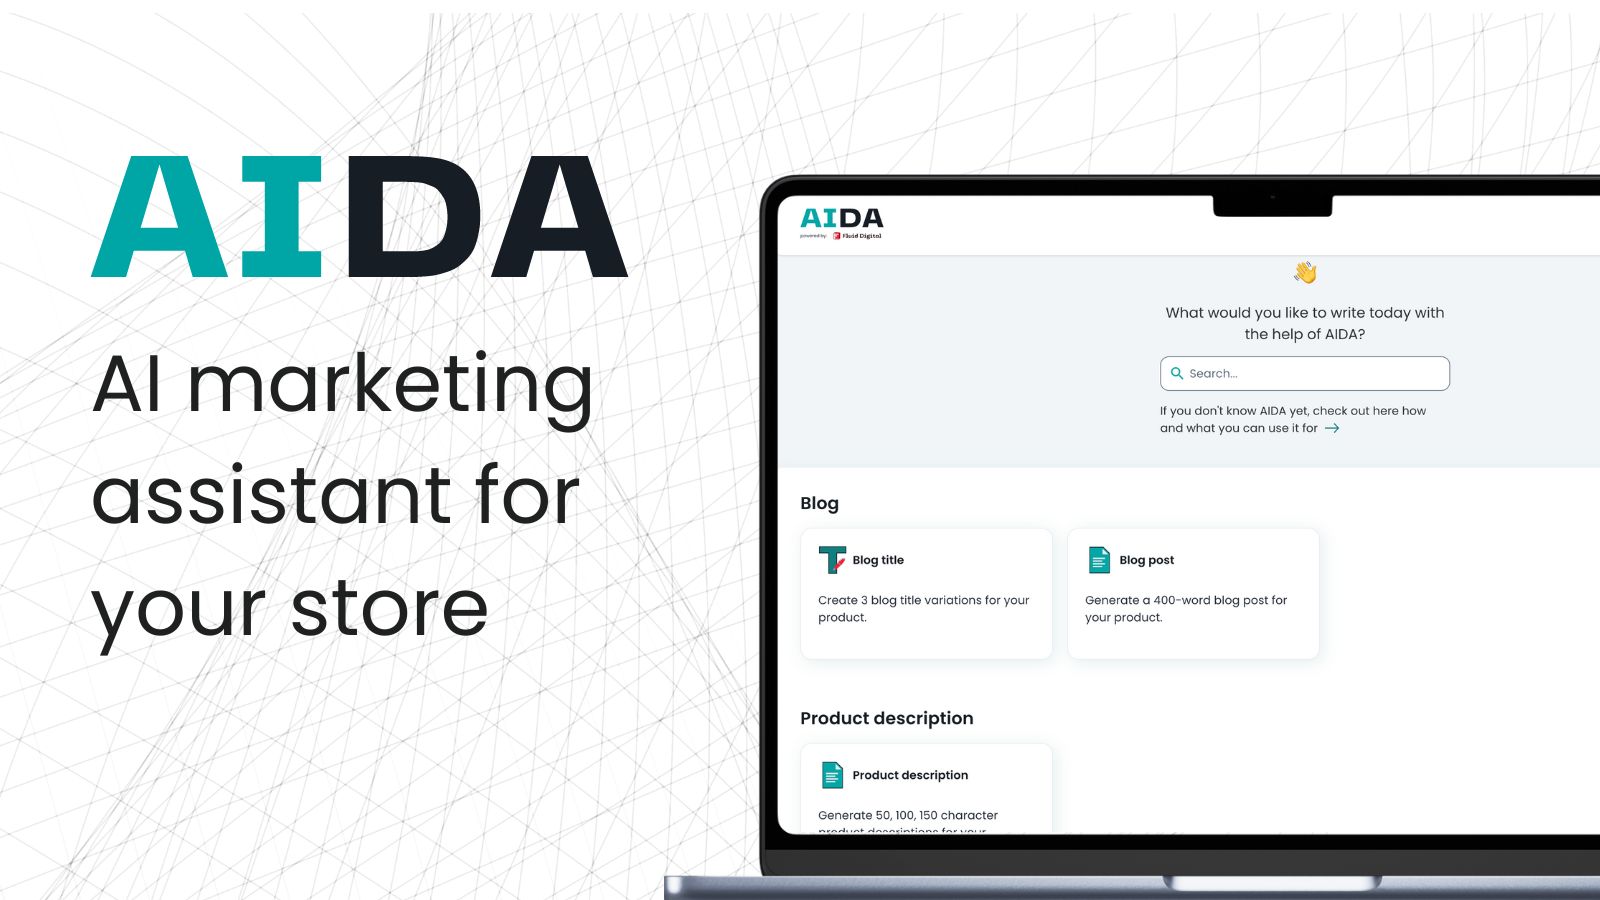 AIDA, AI marketing assistant for your online store